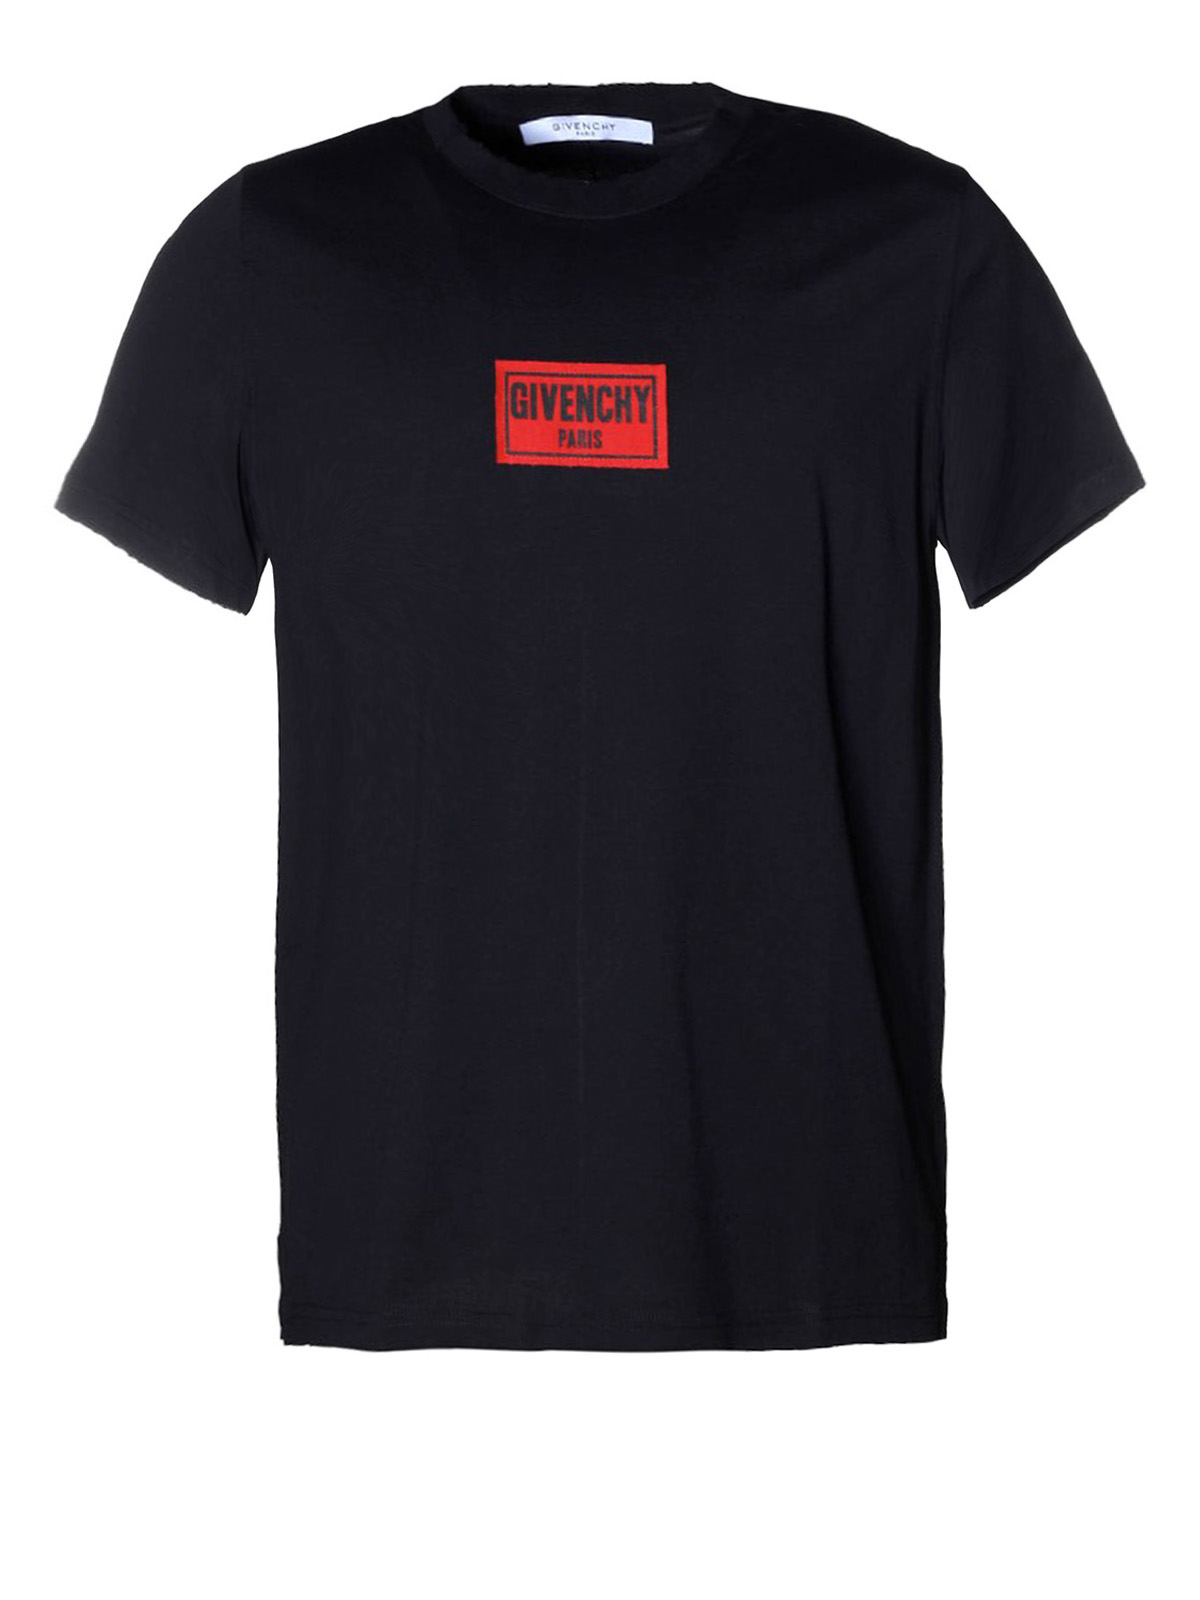 Givenchy - Logo red patch black T-shirt 